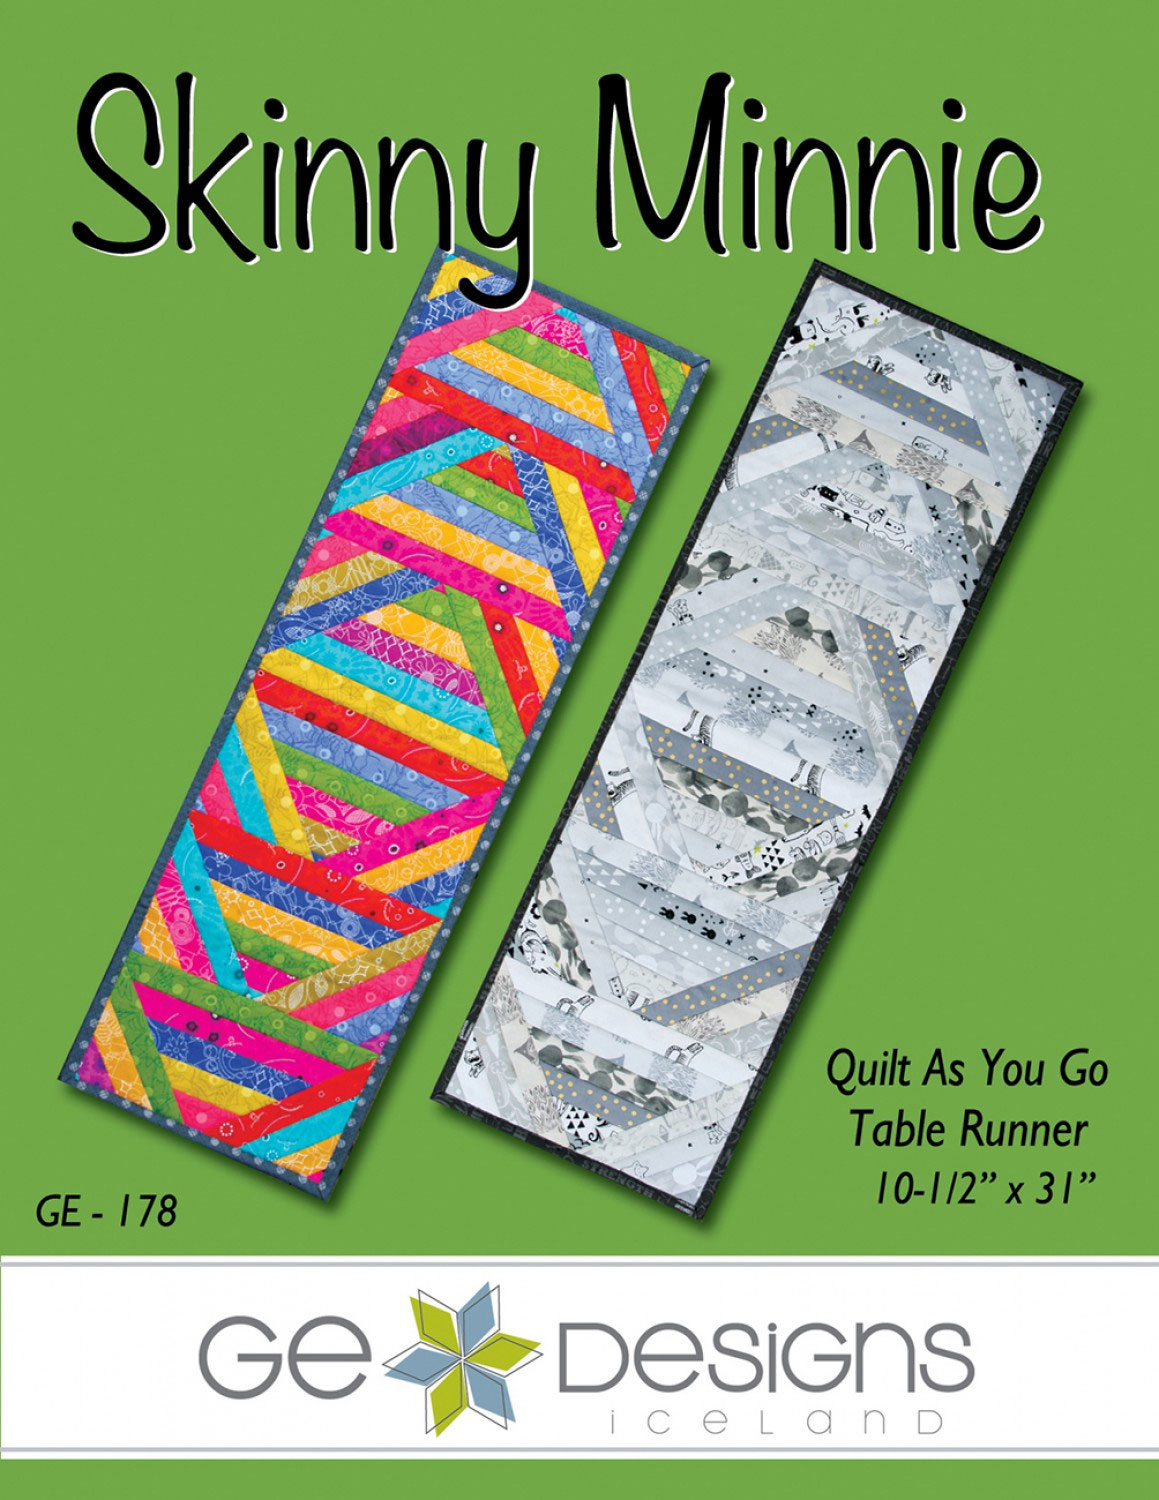 Skinny-Minnie-table-runner-sewing-pattern-GE-Designs-front